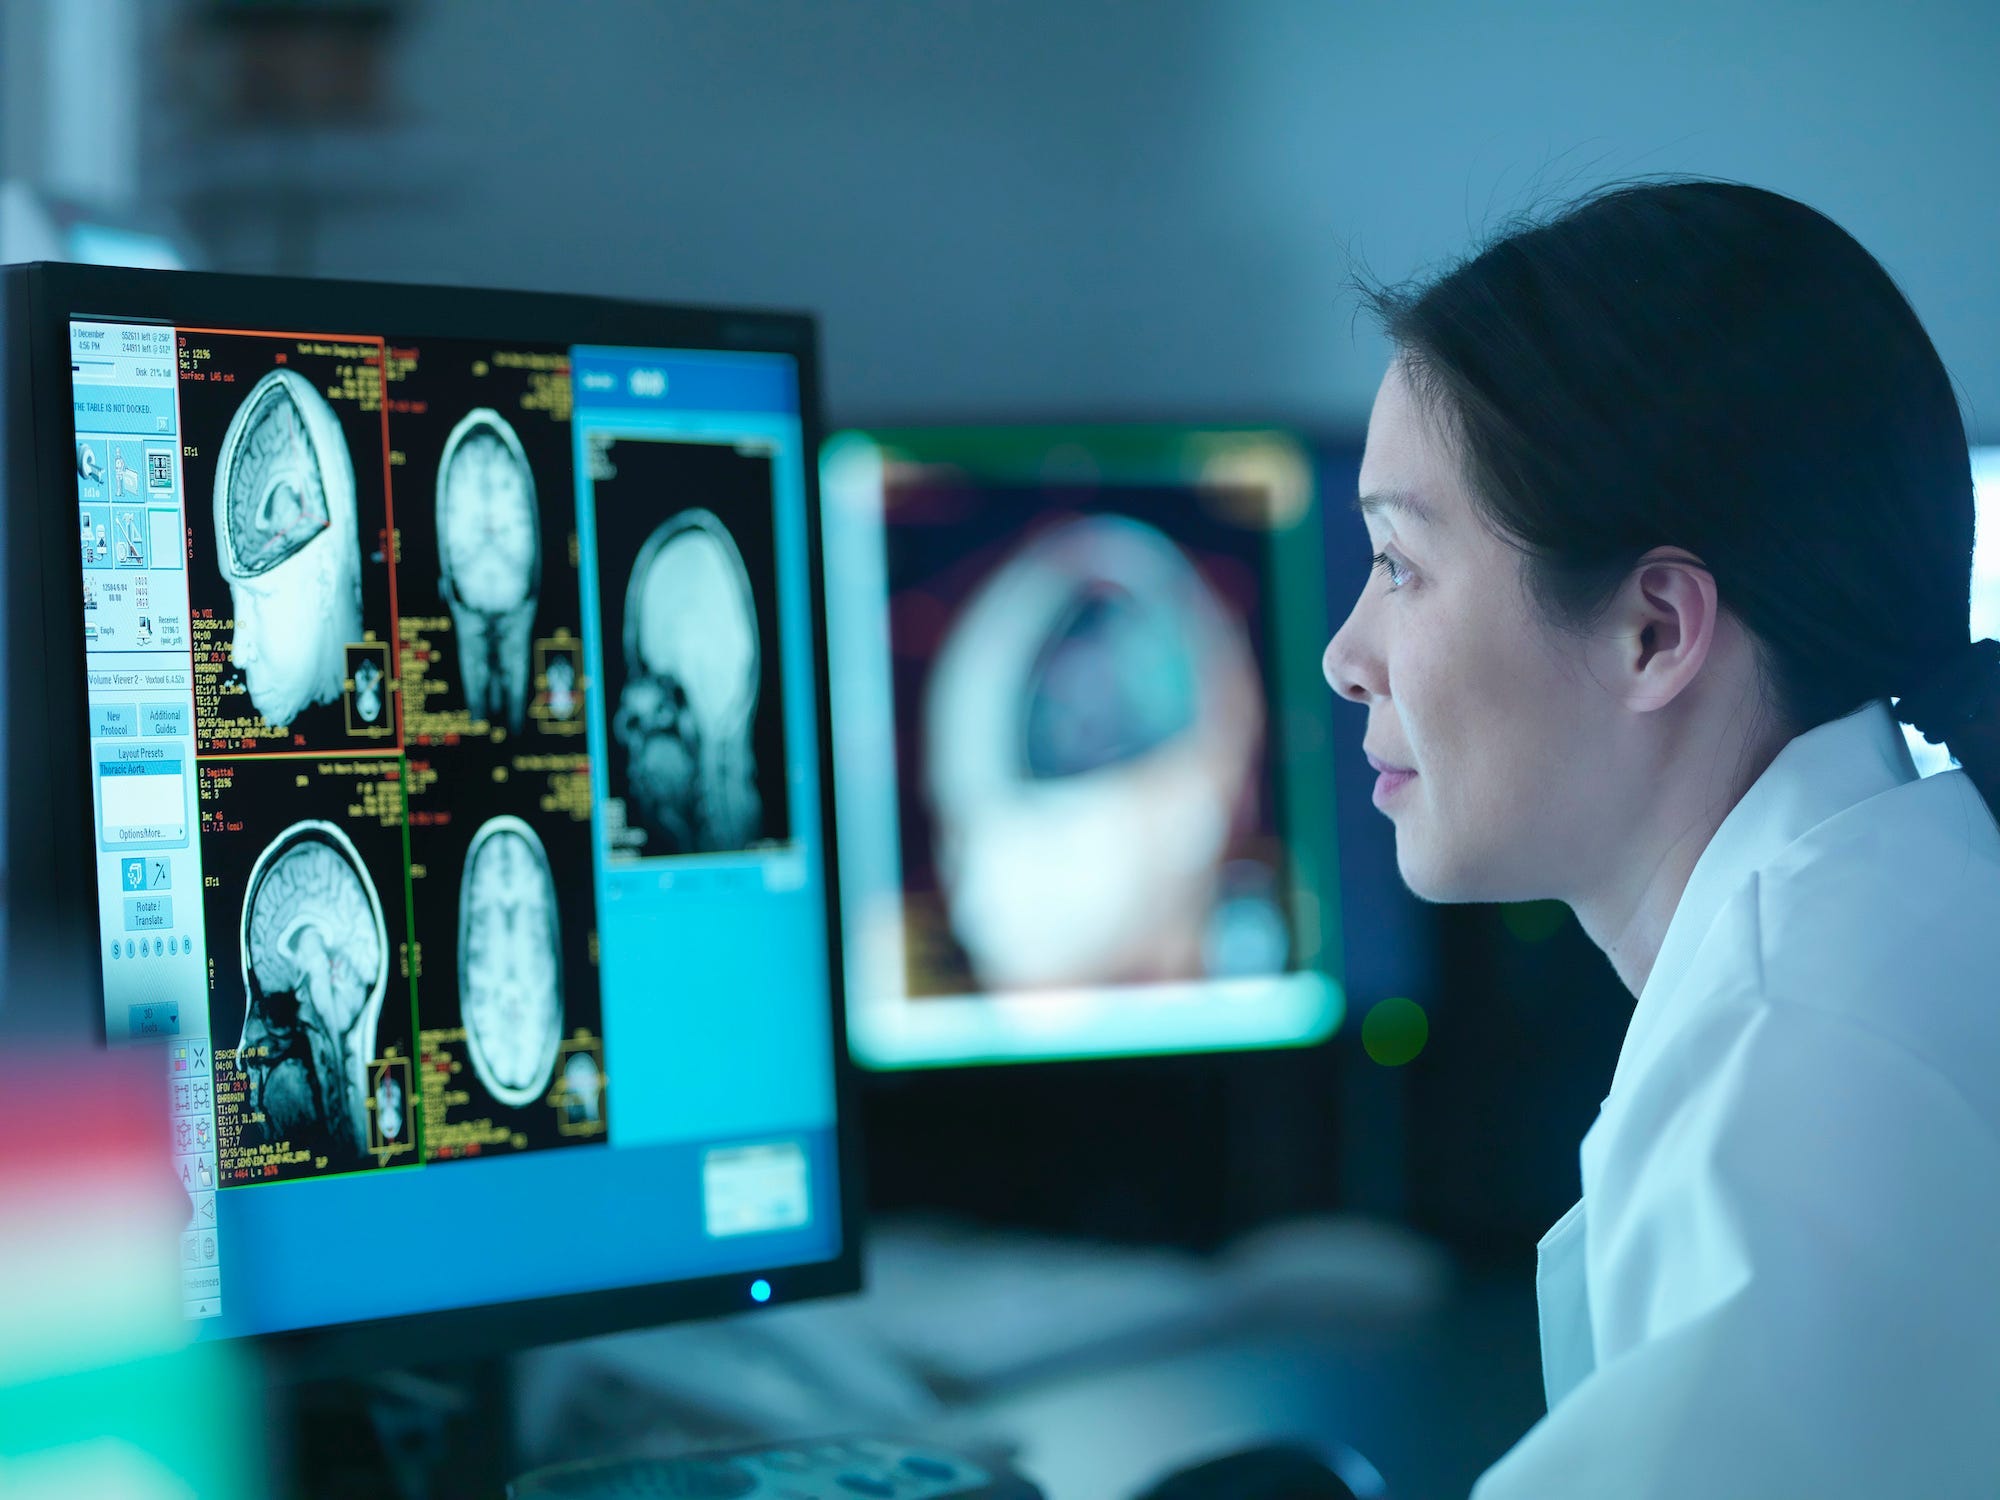 MRI tech looking at scans from Magnetic Resonance Imaging